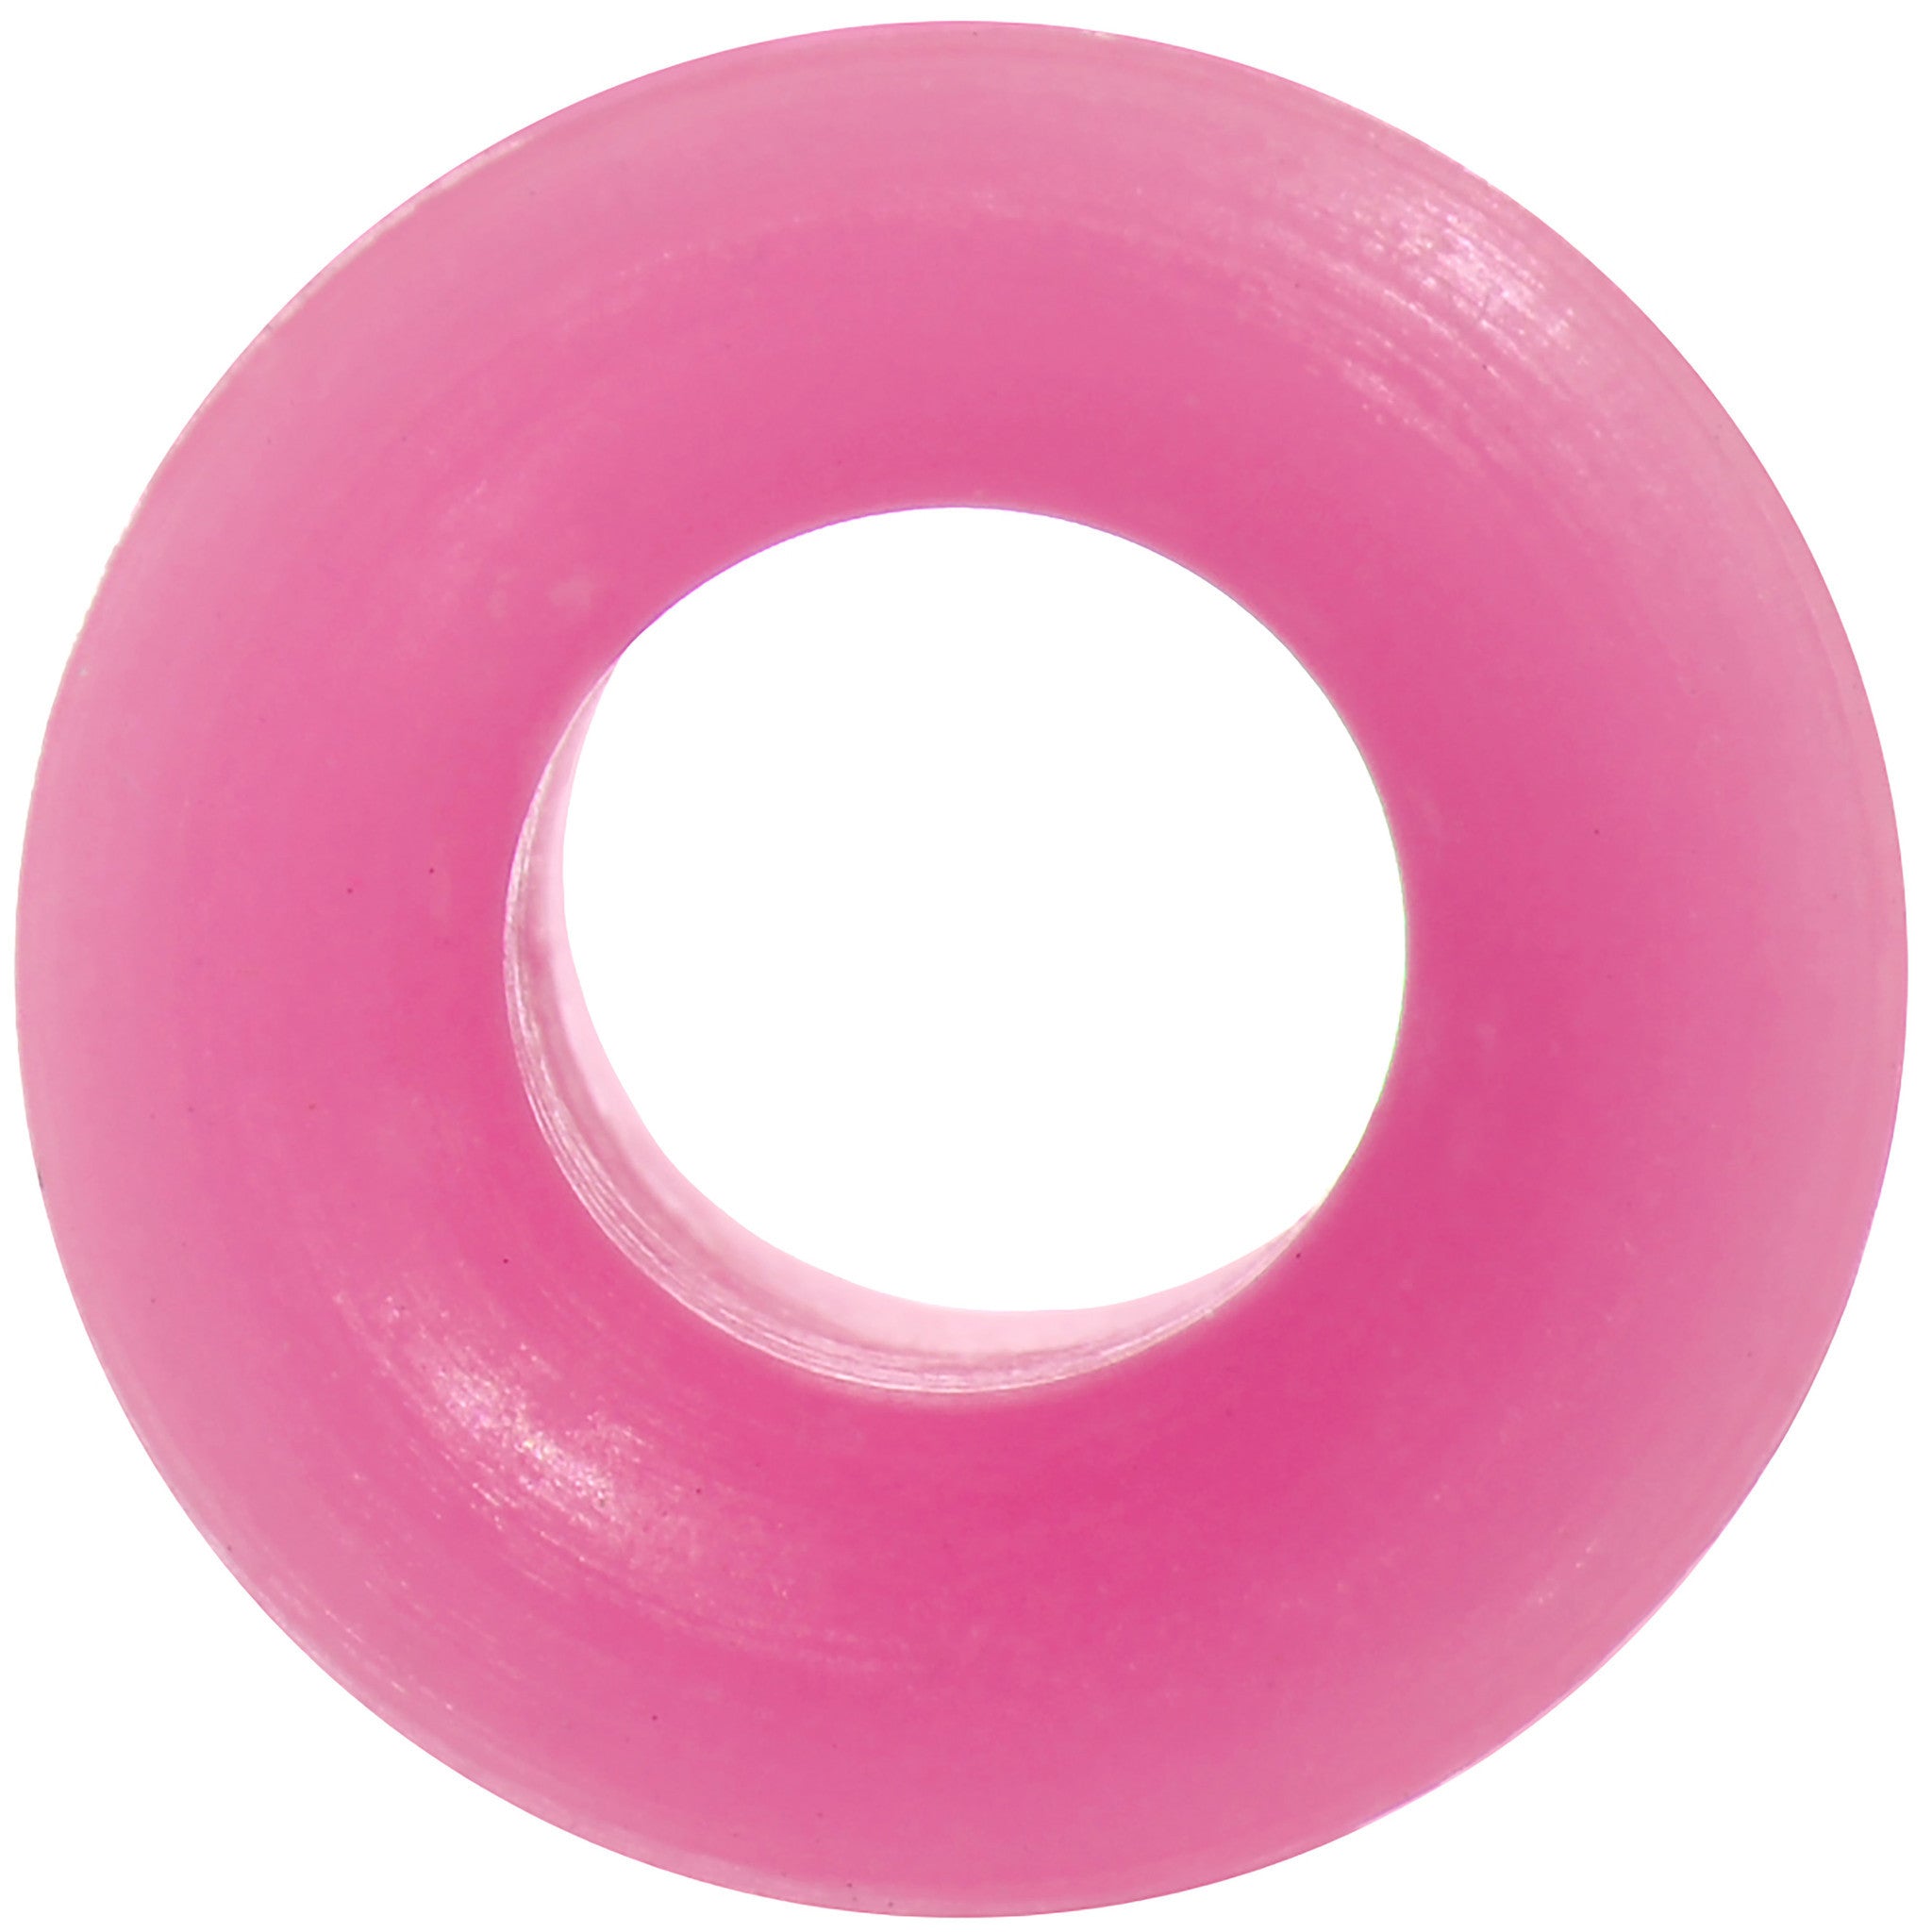 6 Gauge Neon Pink Silicone Glow in the Dark Double Flare Tunnel